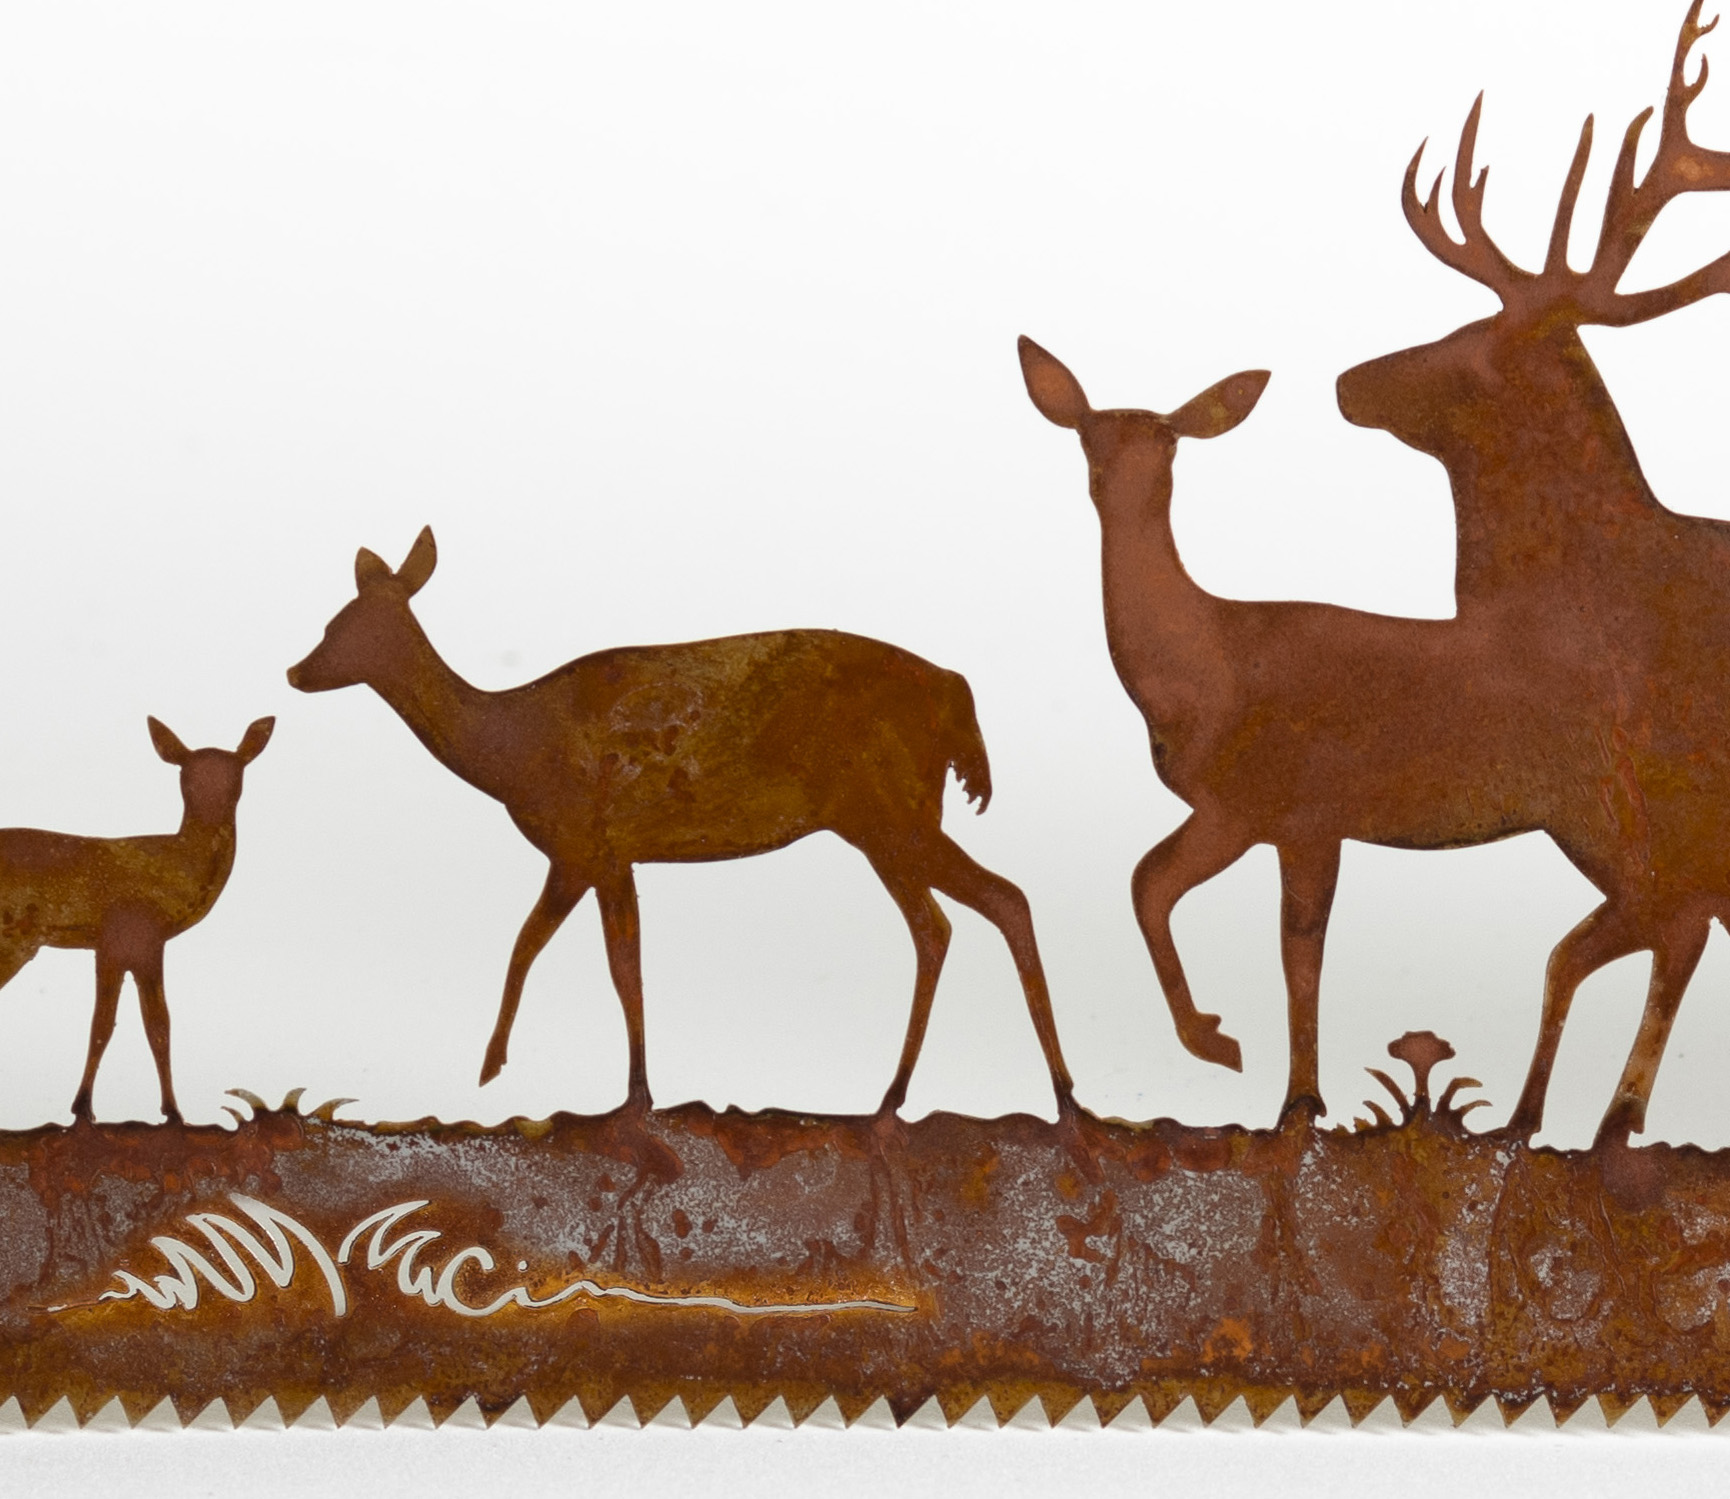 Deer-in-the-forest metal wall saw art